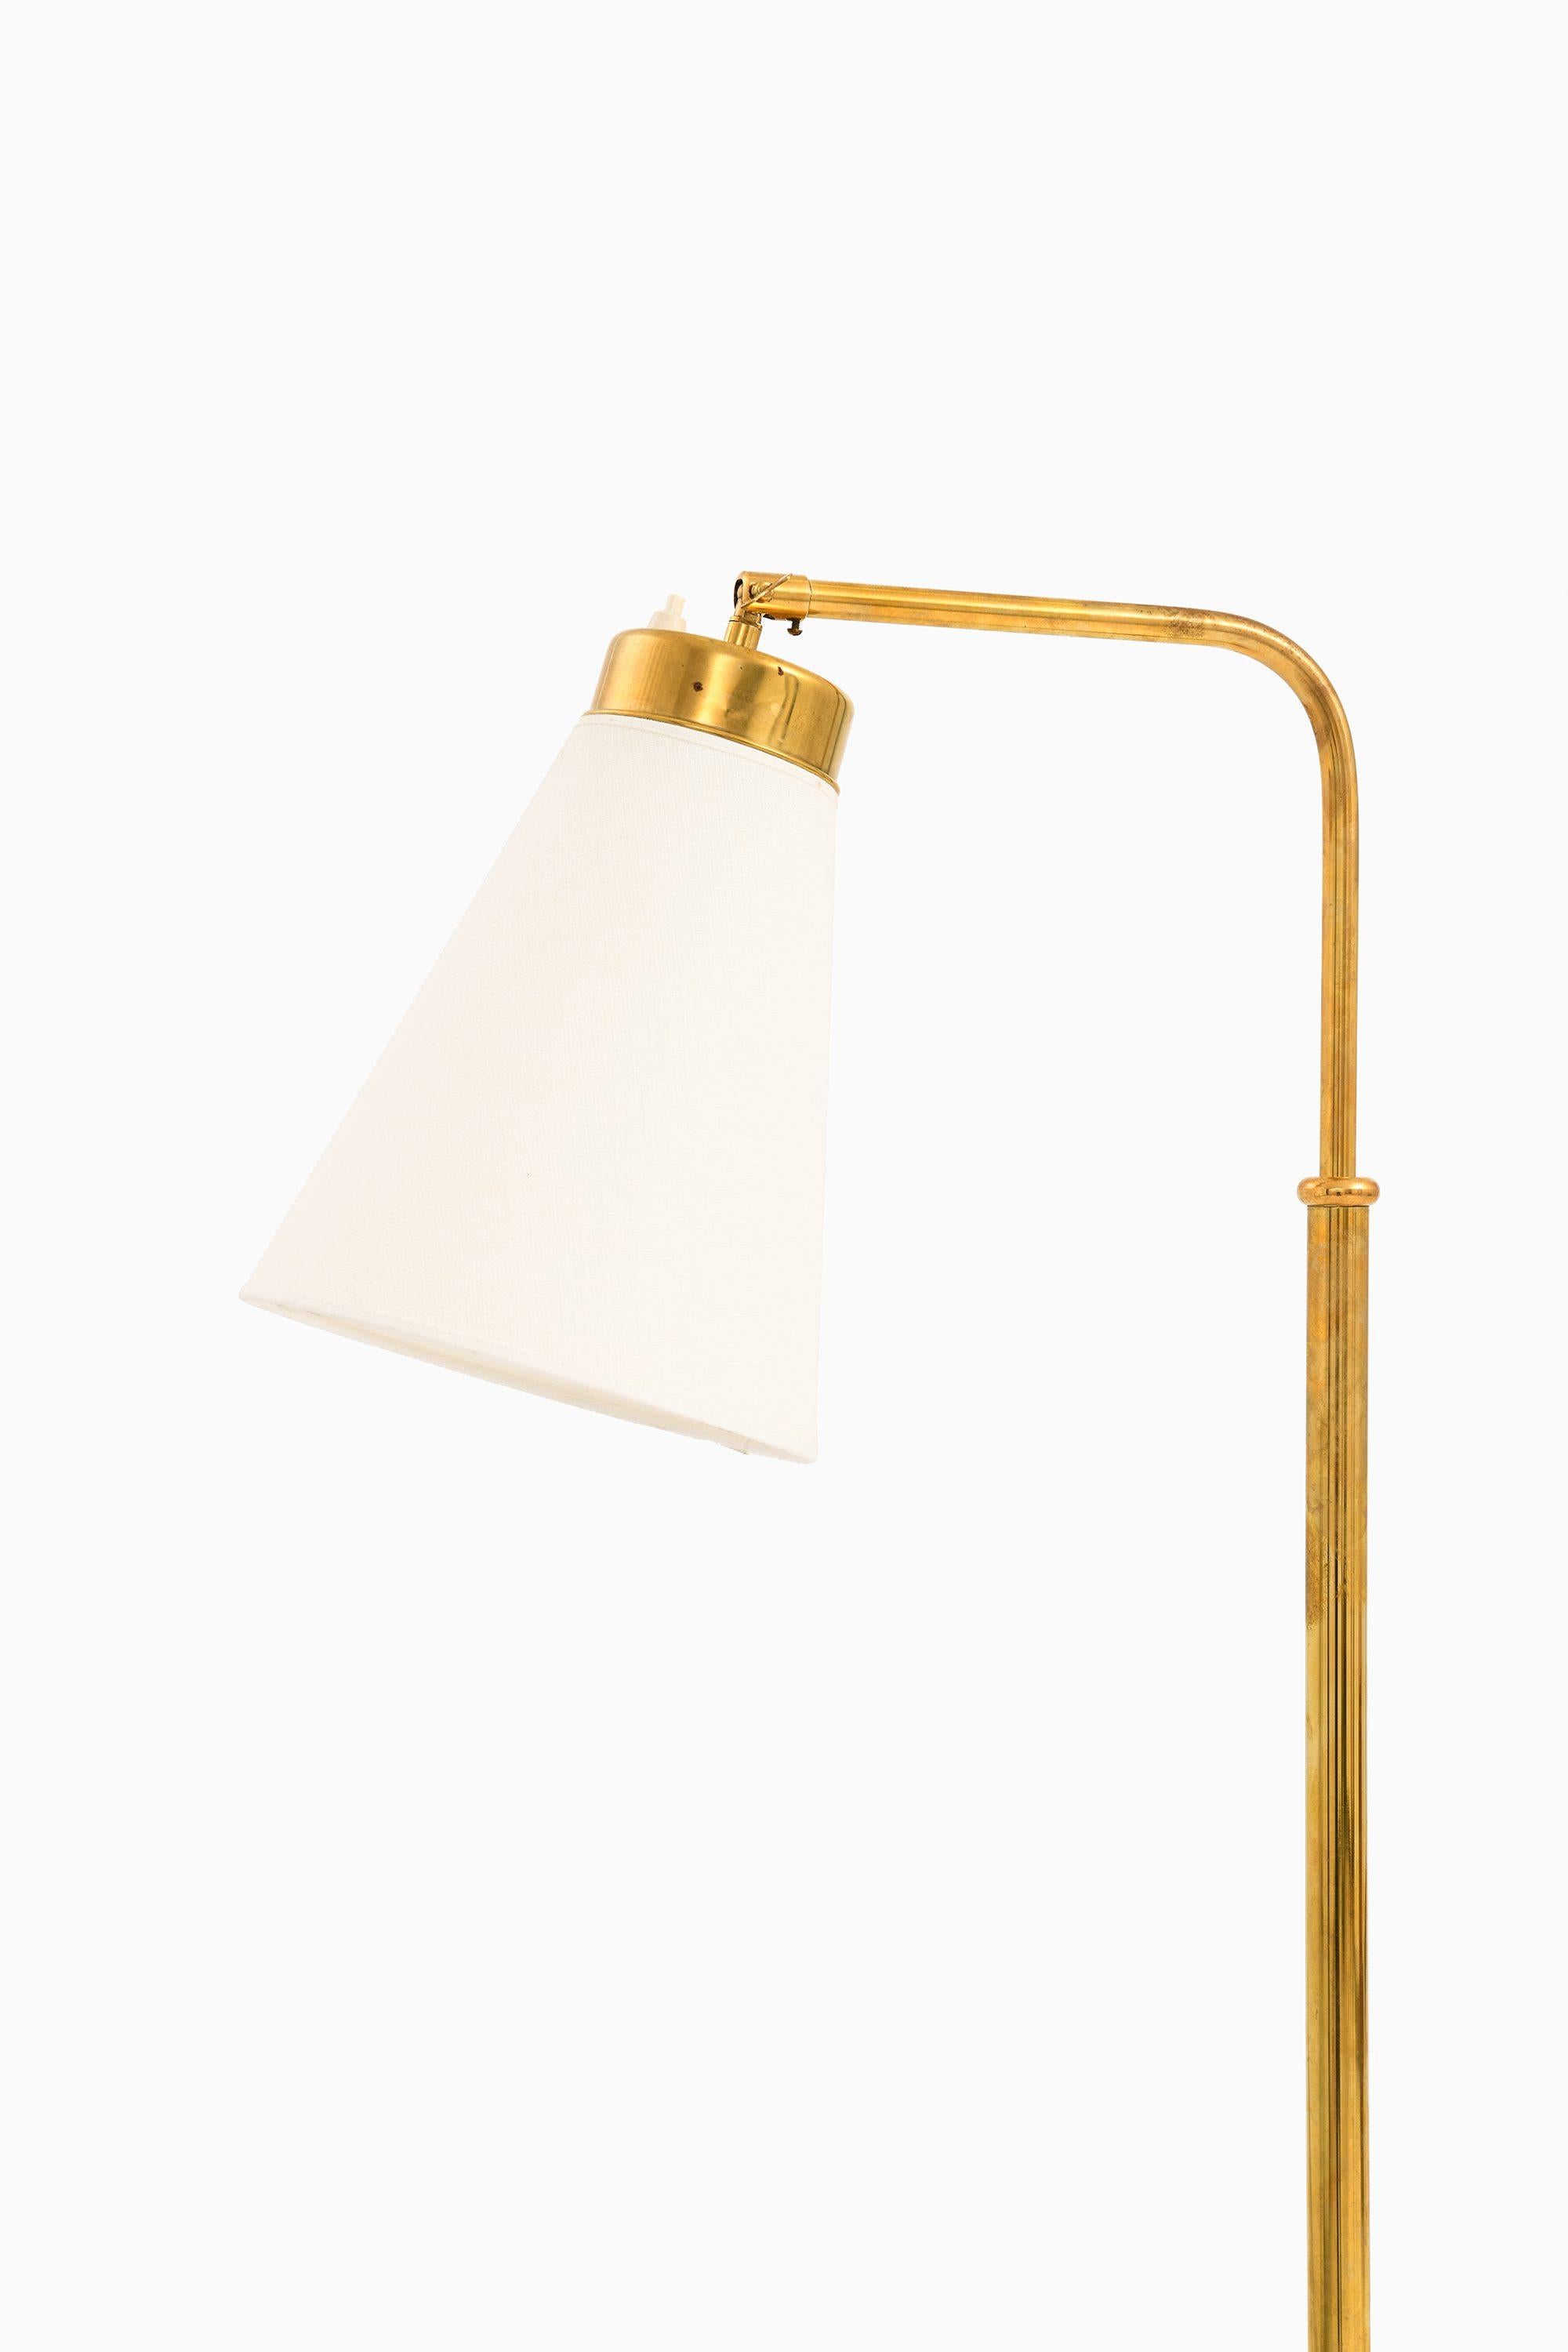 Height Adjustable Floor Lamp in Brass By Josef Frank, 1950's

Additional Information:
Material: Brass
Style: Mid century, Scandinavian
Height adjustable floor lamp model 1842
Produced by Svenskt Tenn in Sweden
Dimensions (W x D x H): 20 x 50 x